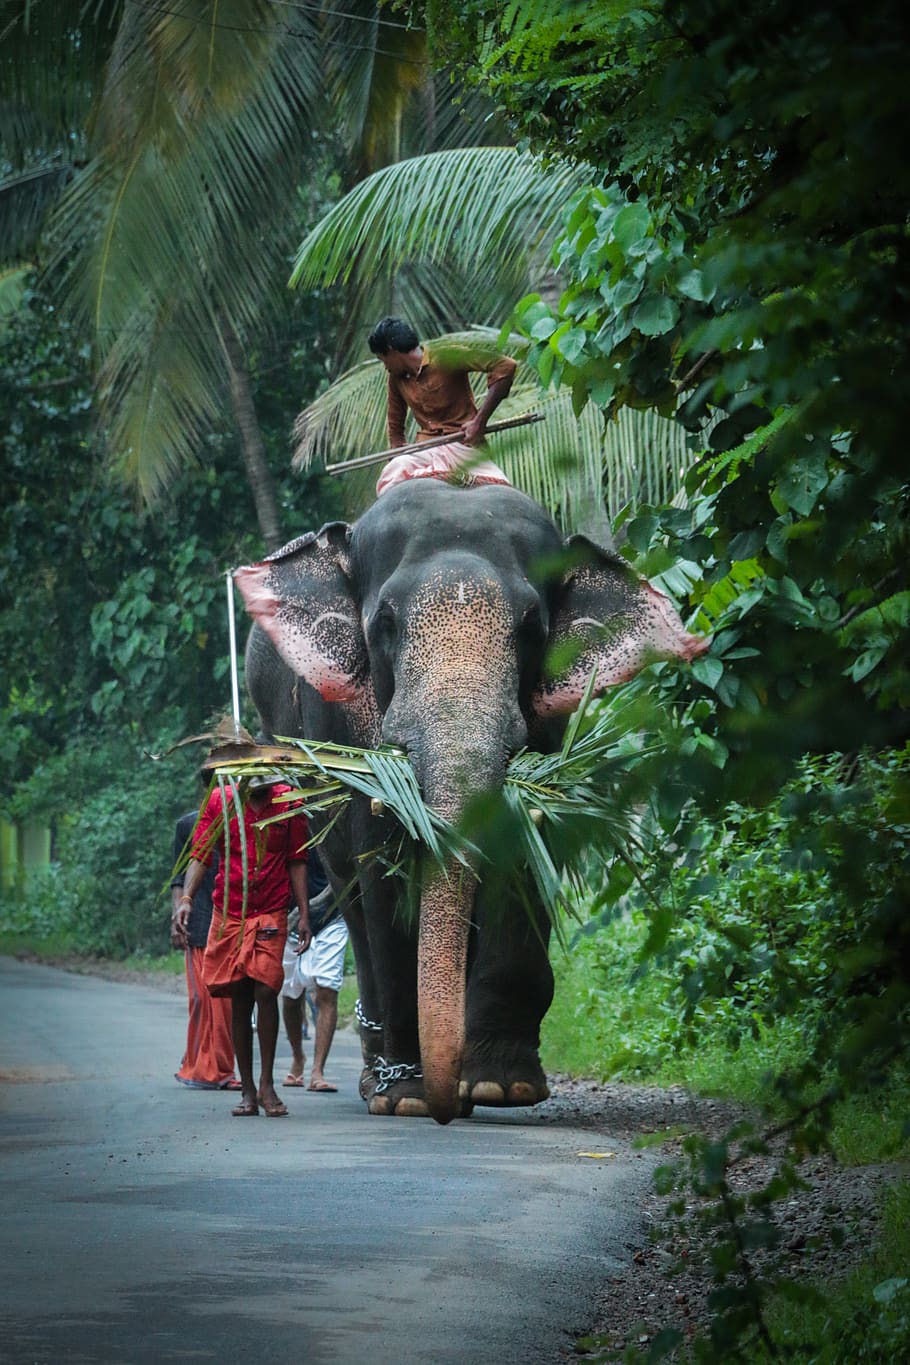 man riding elephant on road, human, person, people, furniture